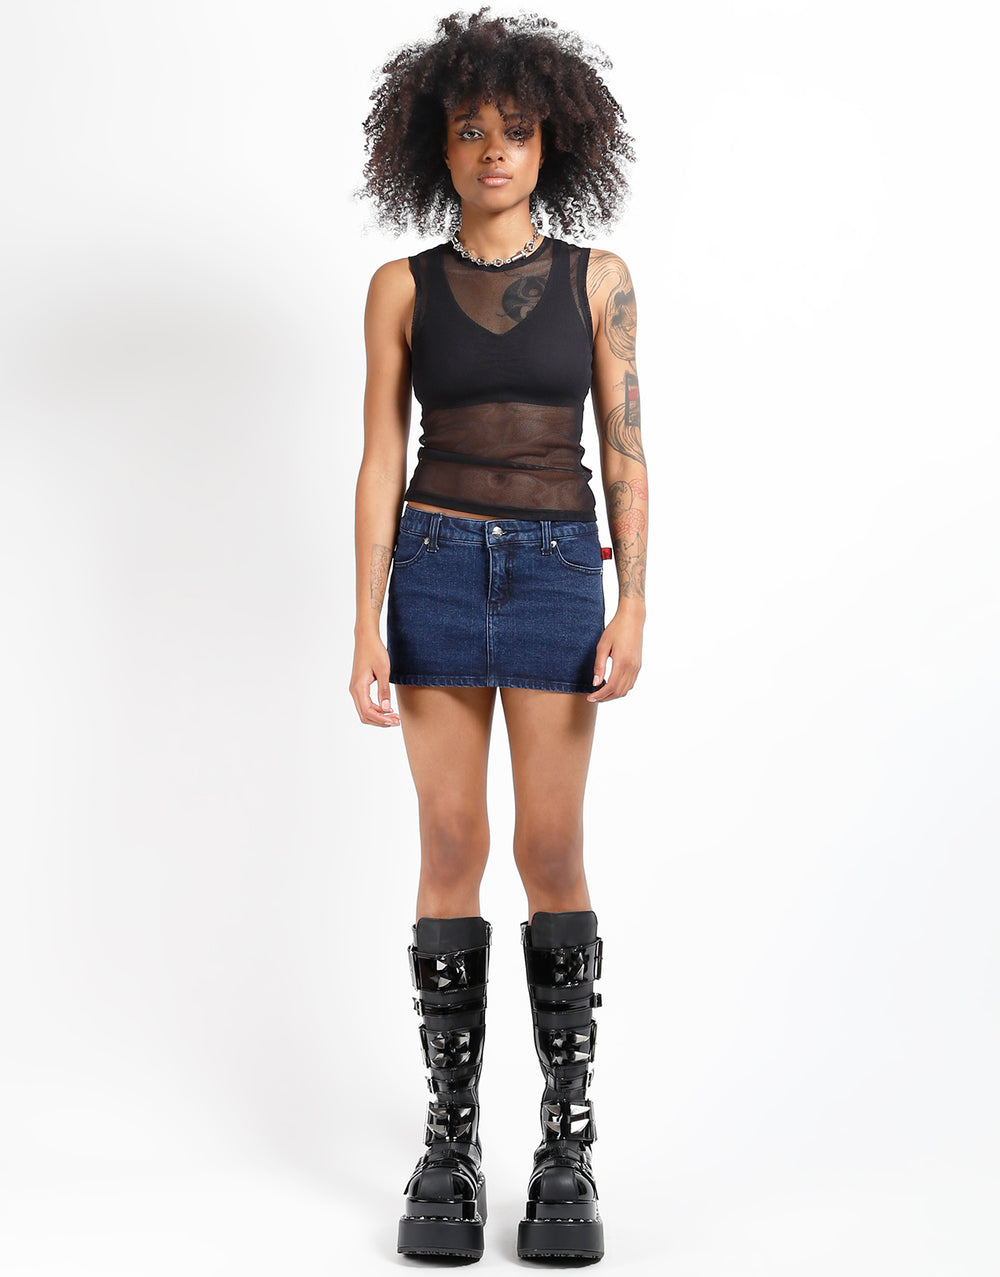 Hoermanseder x About You Skirt 'Guya' in Blue Denim | ABOUT YOU